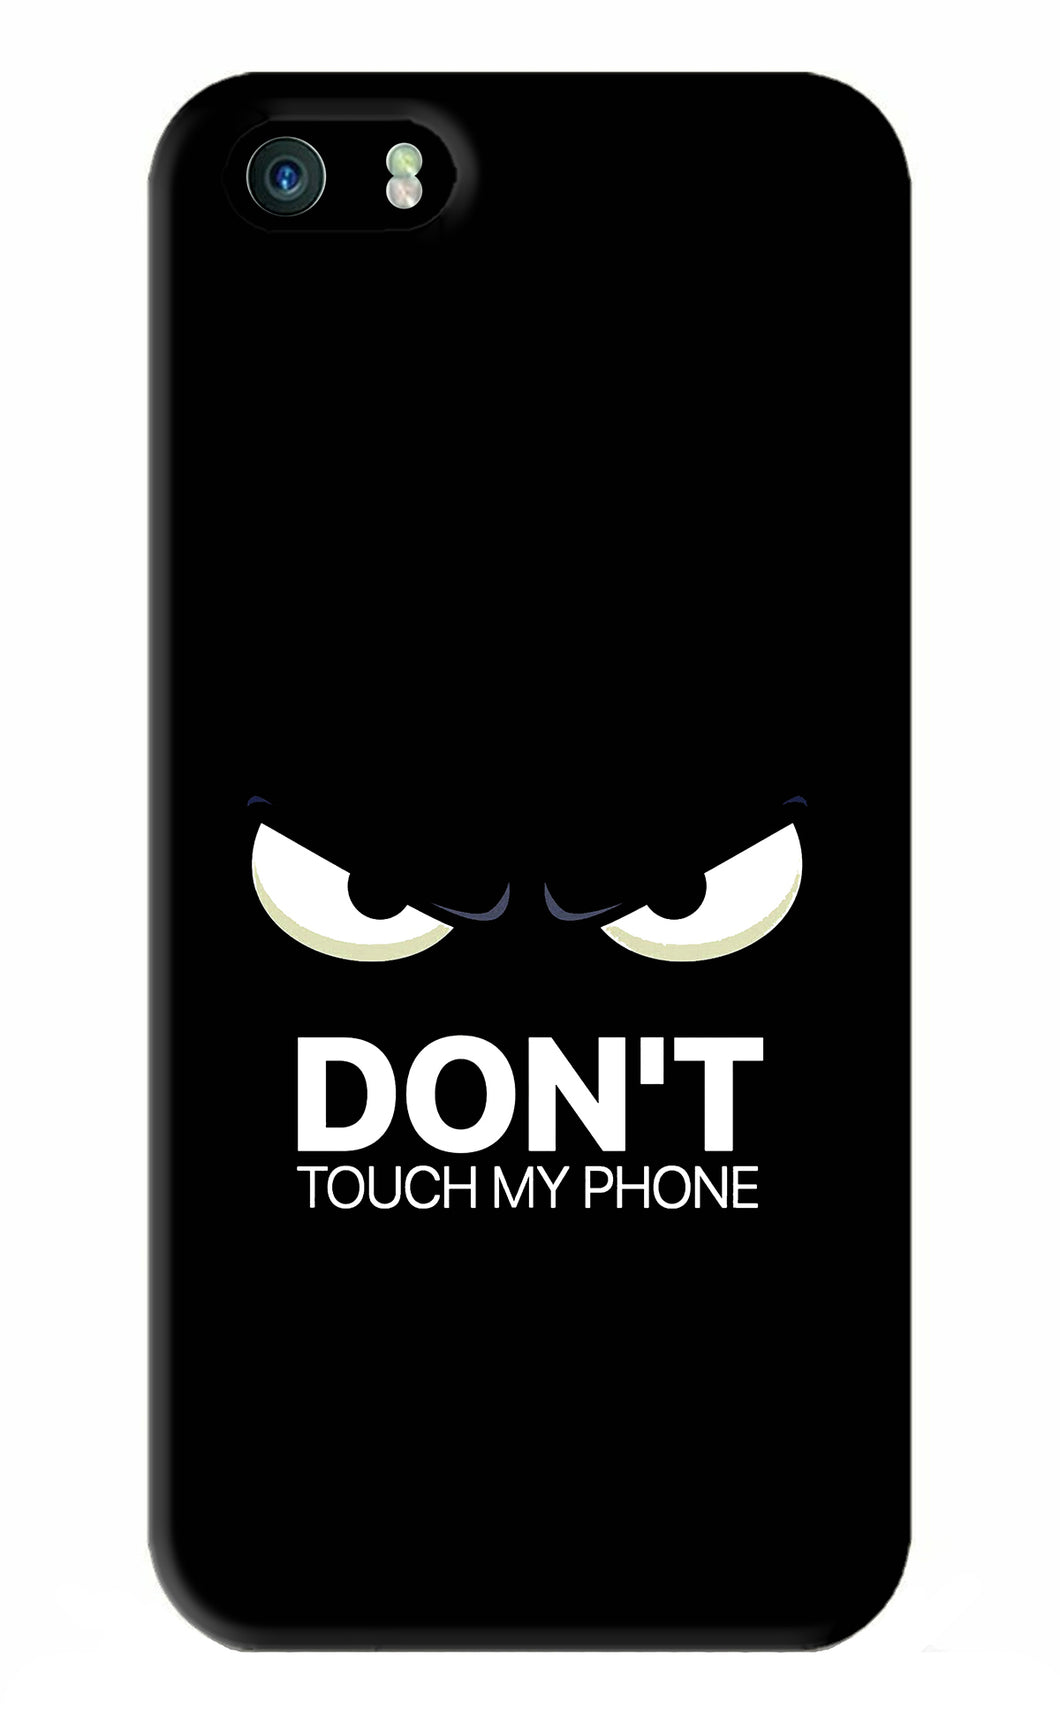 Don'T Touch My Phone iPhone 5 Back Skin Wrap